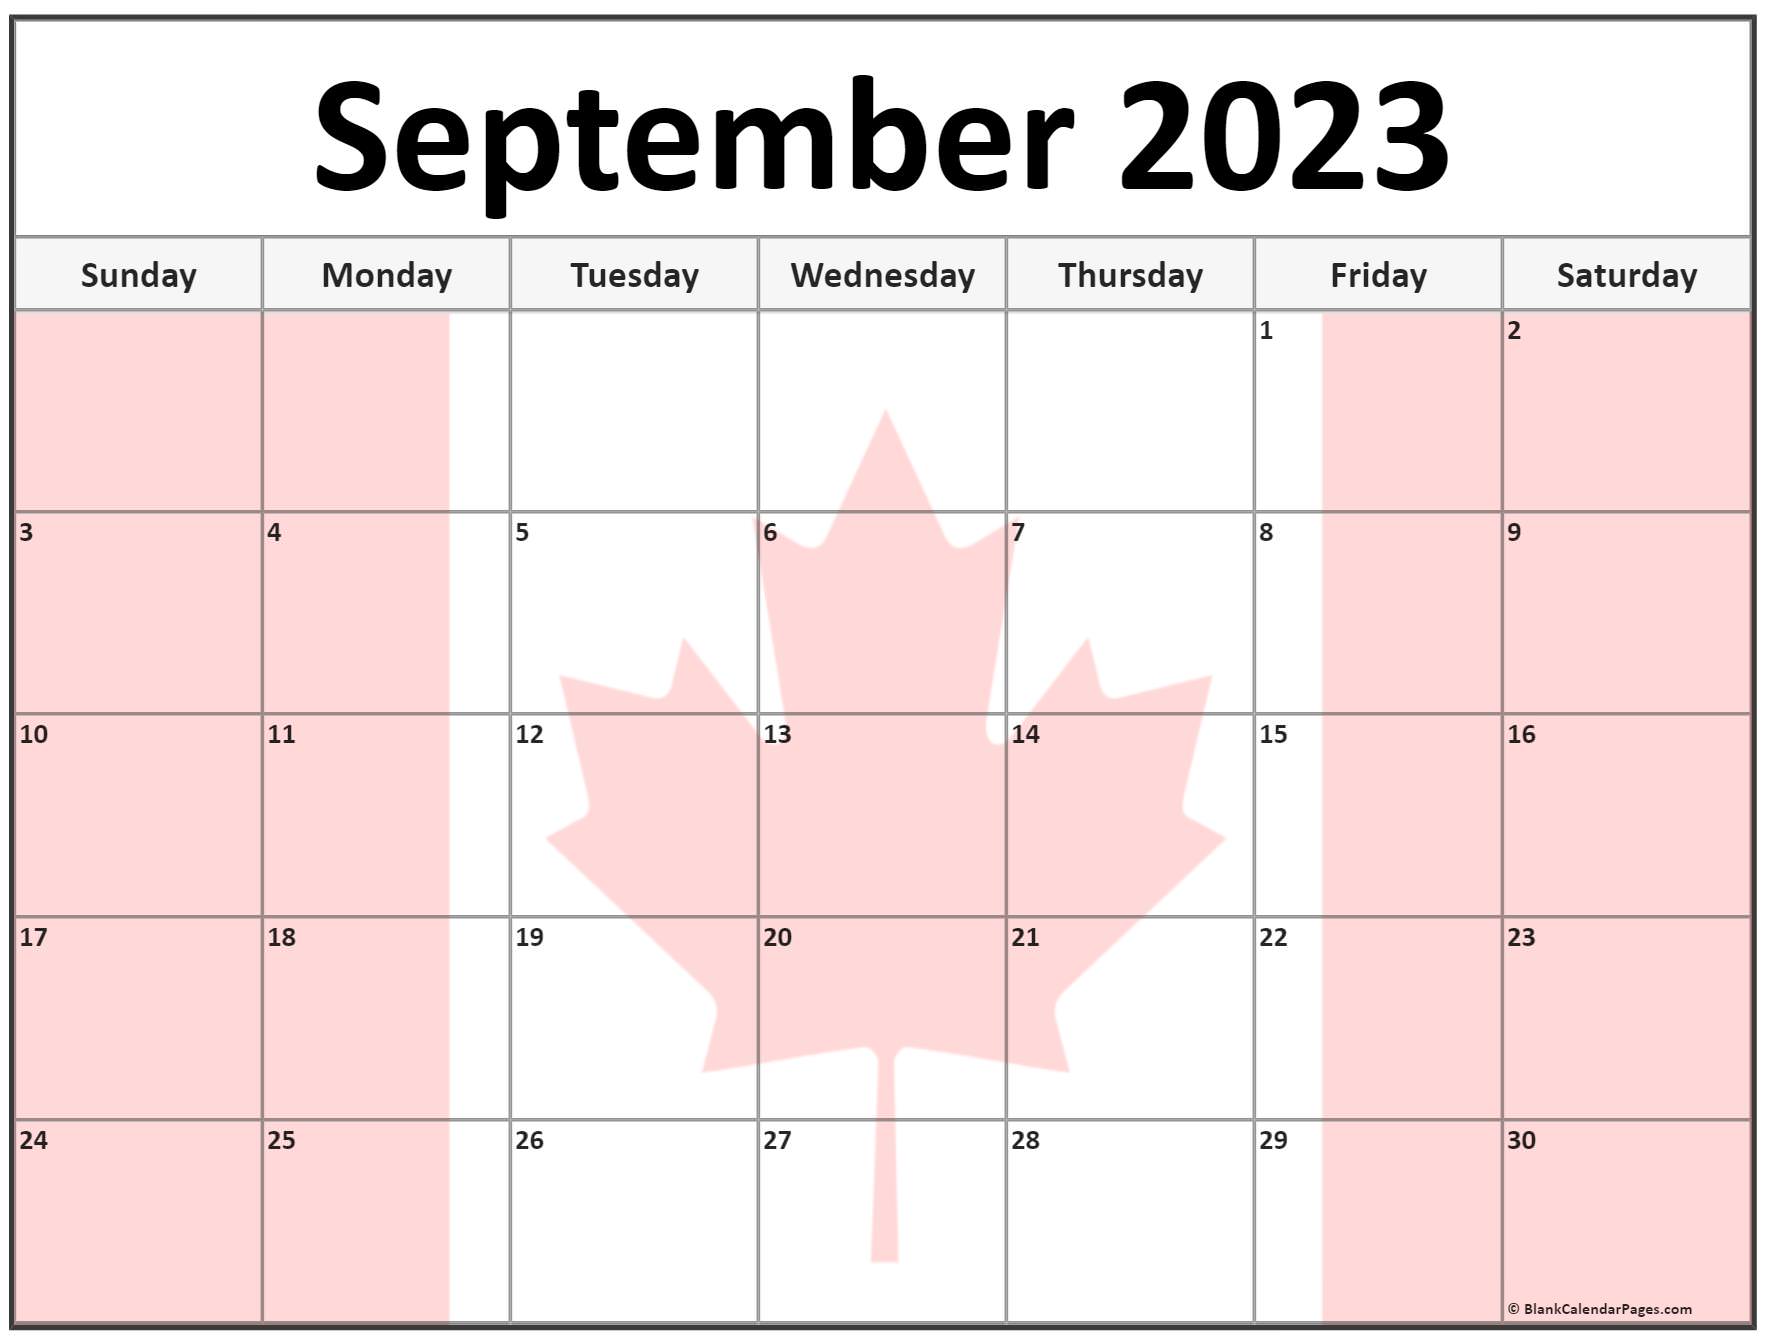 collection-of-september-2023-photo-calendars-with-image-filters